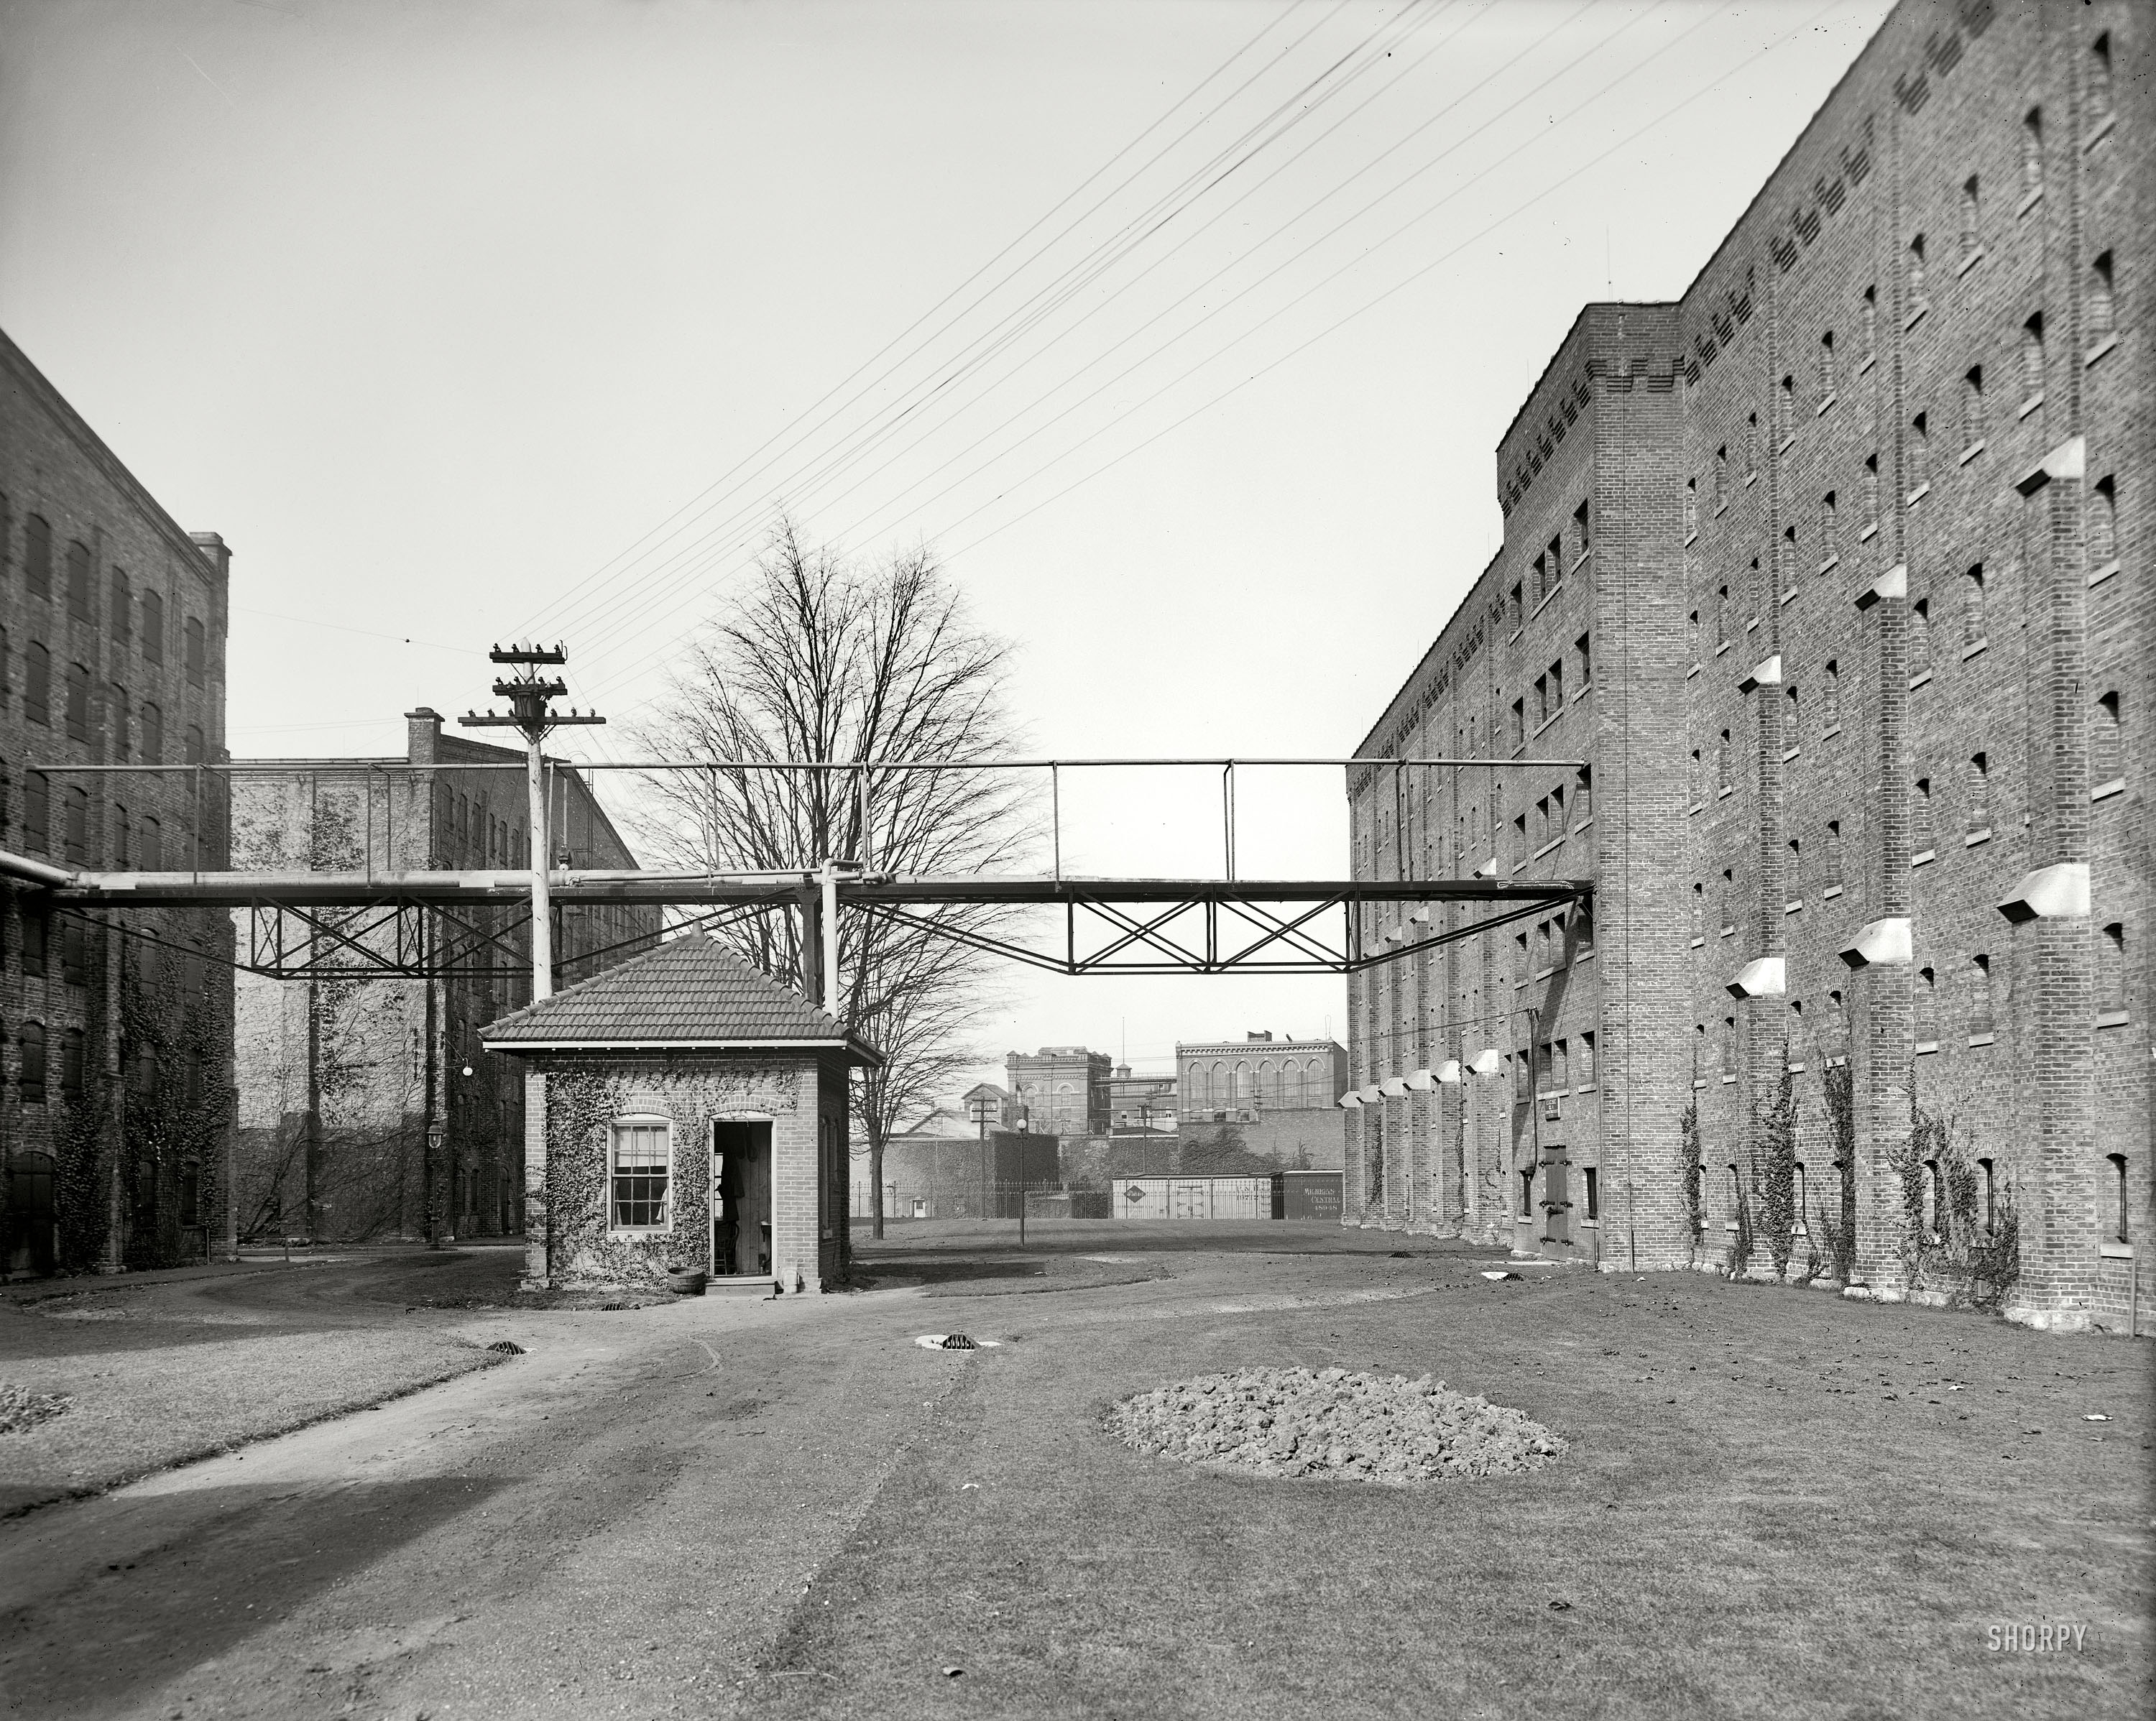 Walkerville, Ontario, circa 1900. "Avenue of rack warehouses, Hiram Walker & Sons." 8x10 inch dry plate glass negative, Detroit Publishing Co. View full size.